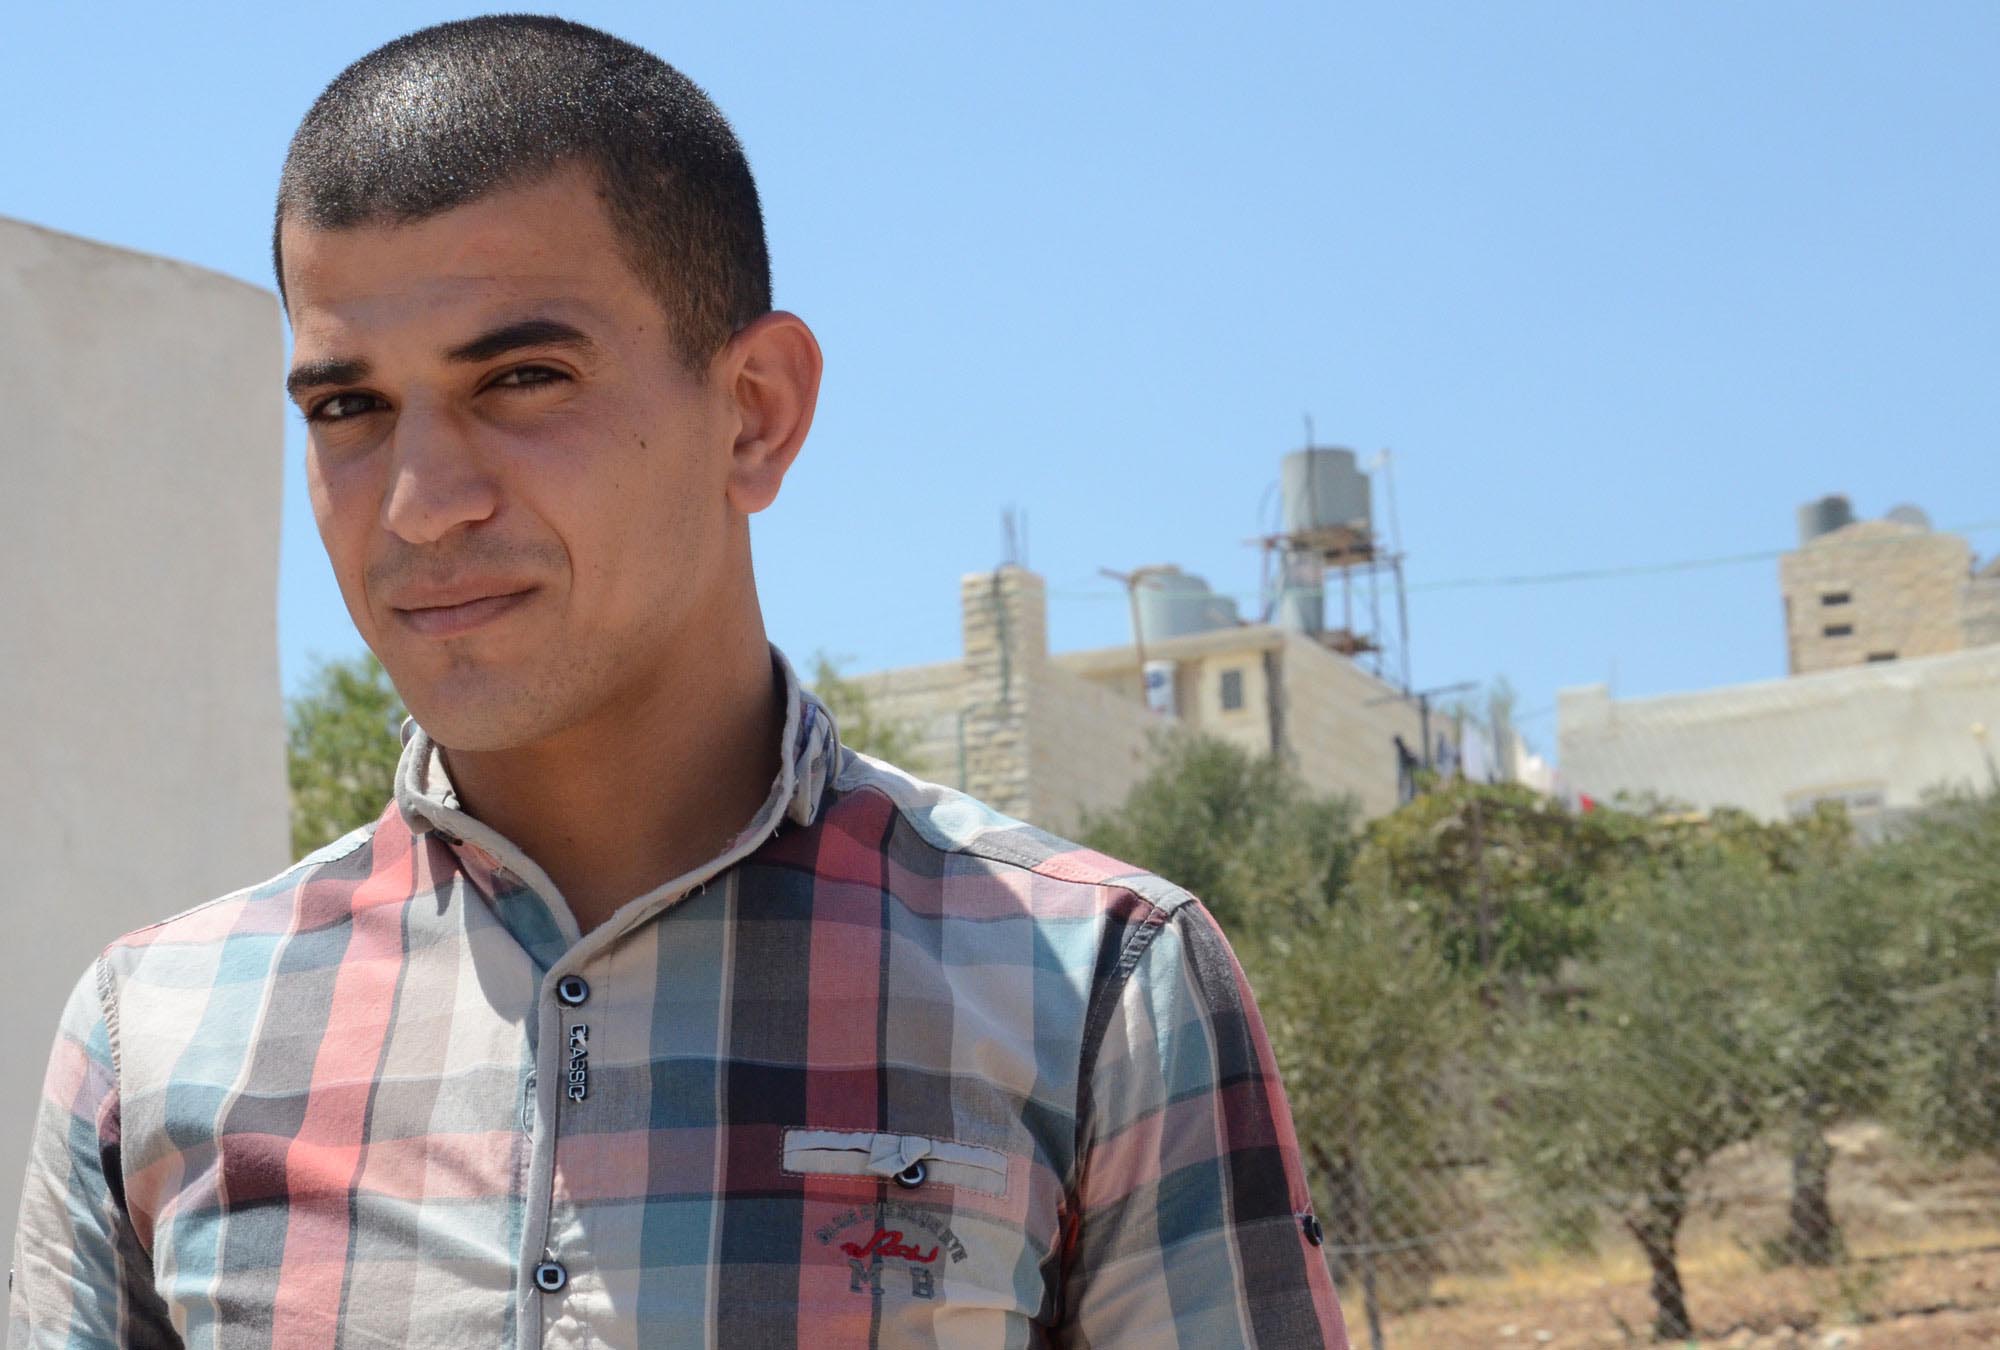 Mahmoud lives in a small village that has been surrounded by the Israeli security wall.